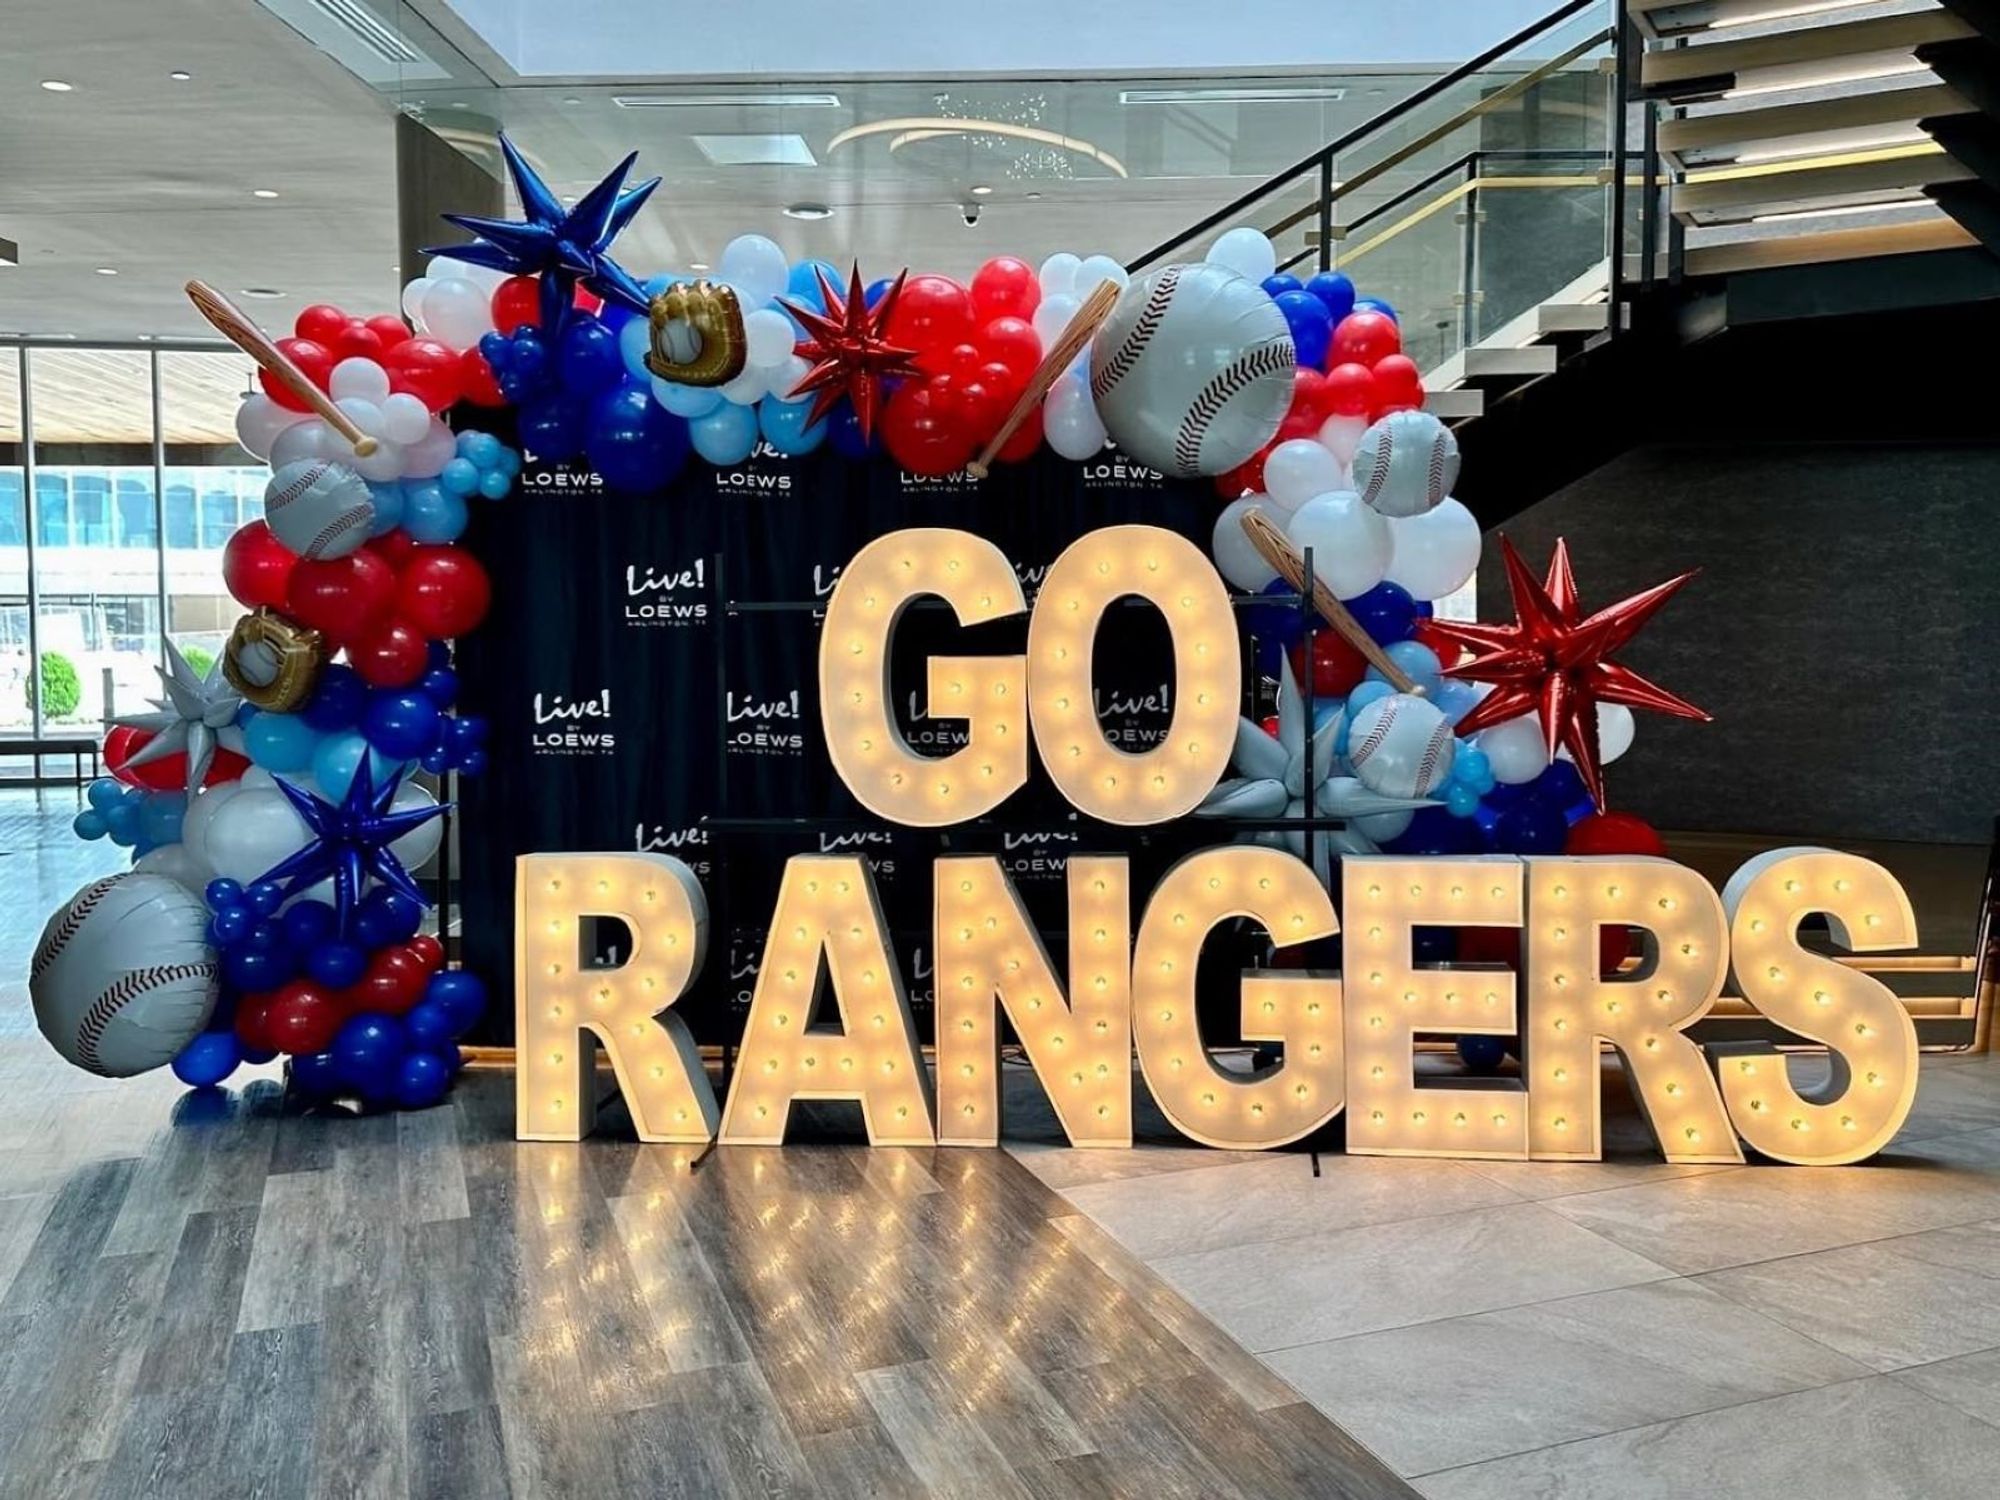 Live! by Loews Hotel tailgate, Go Rangers